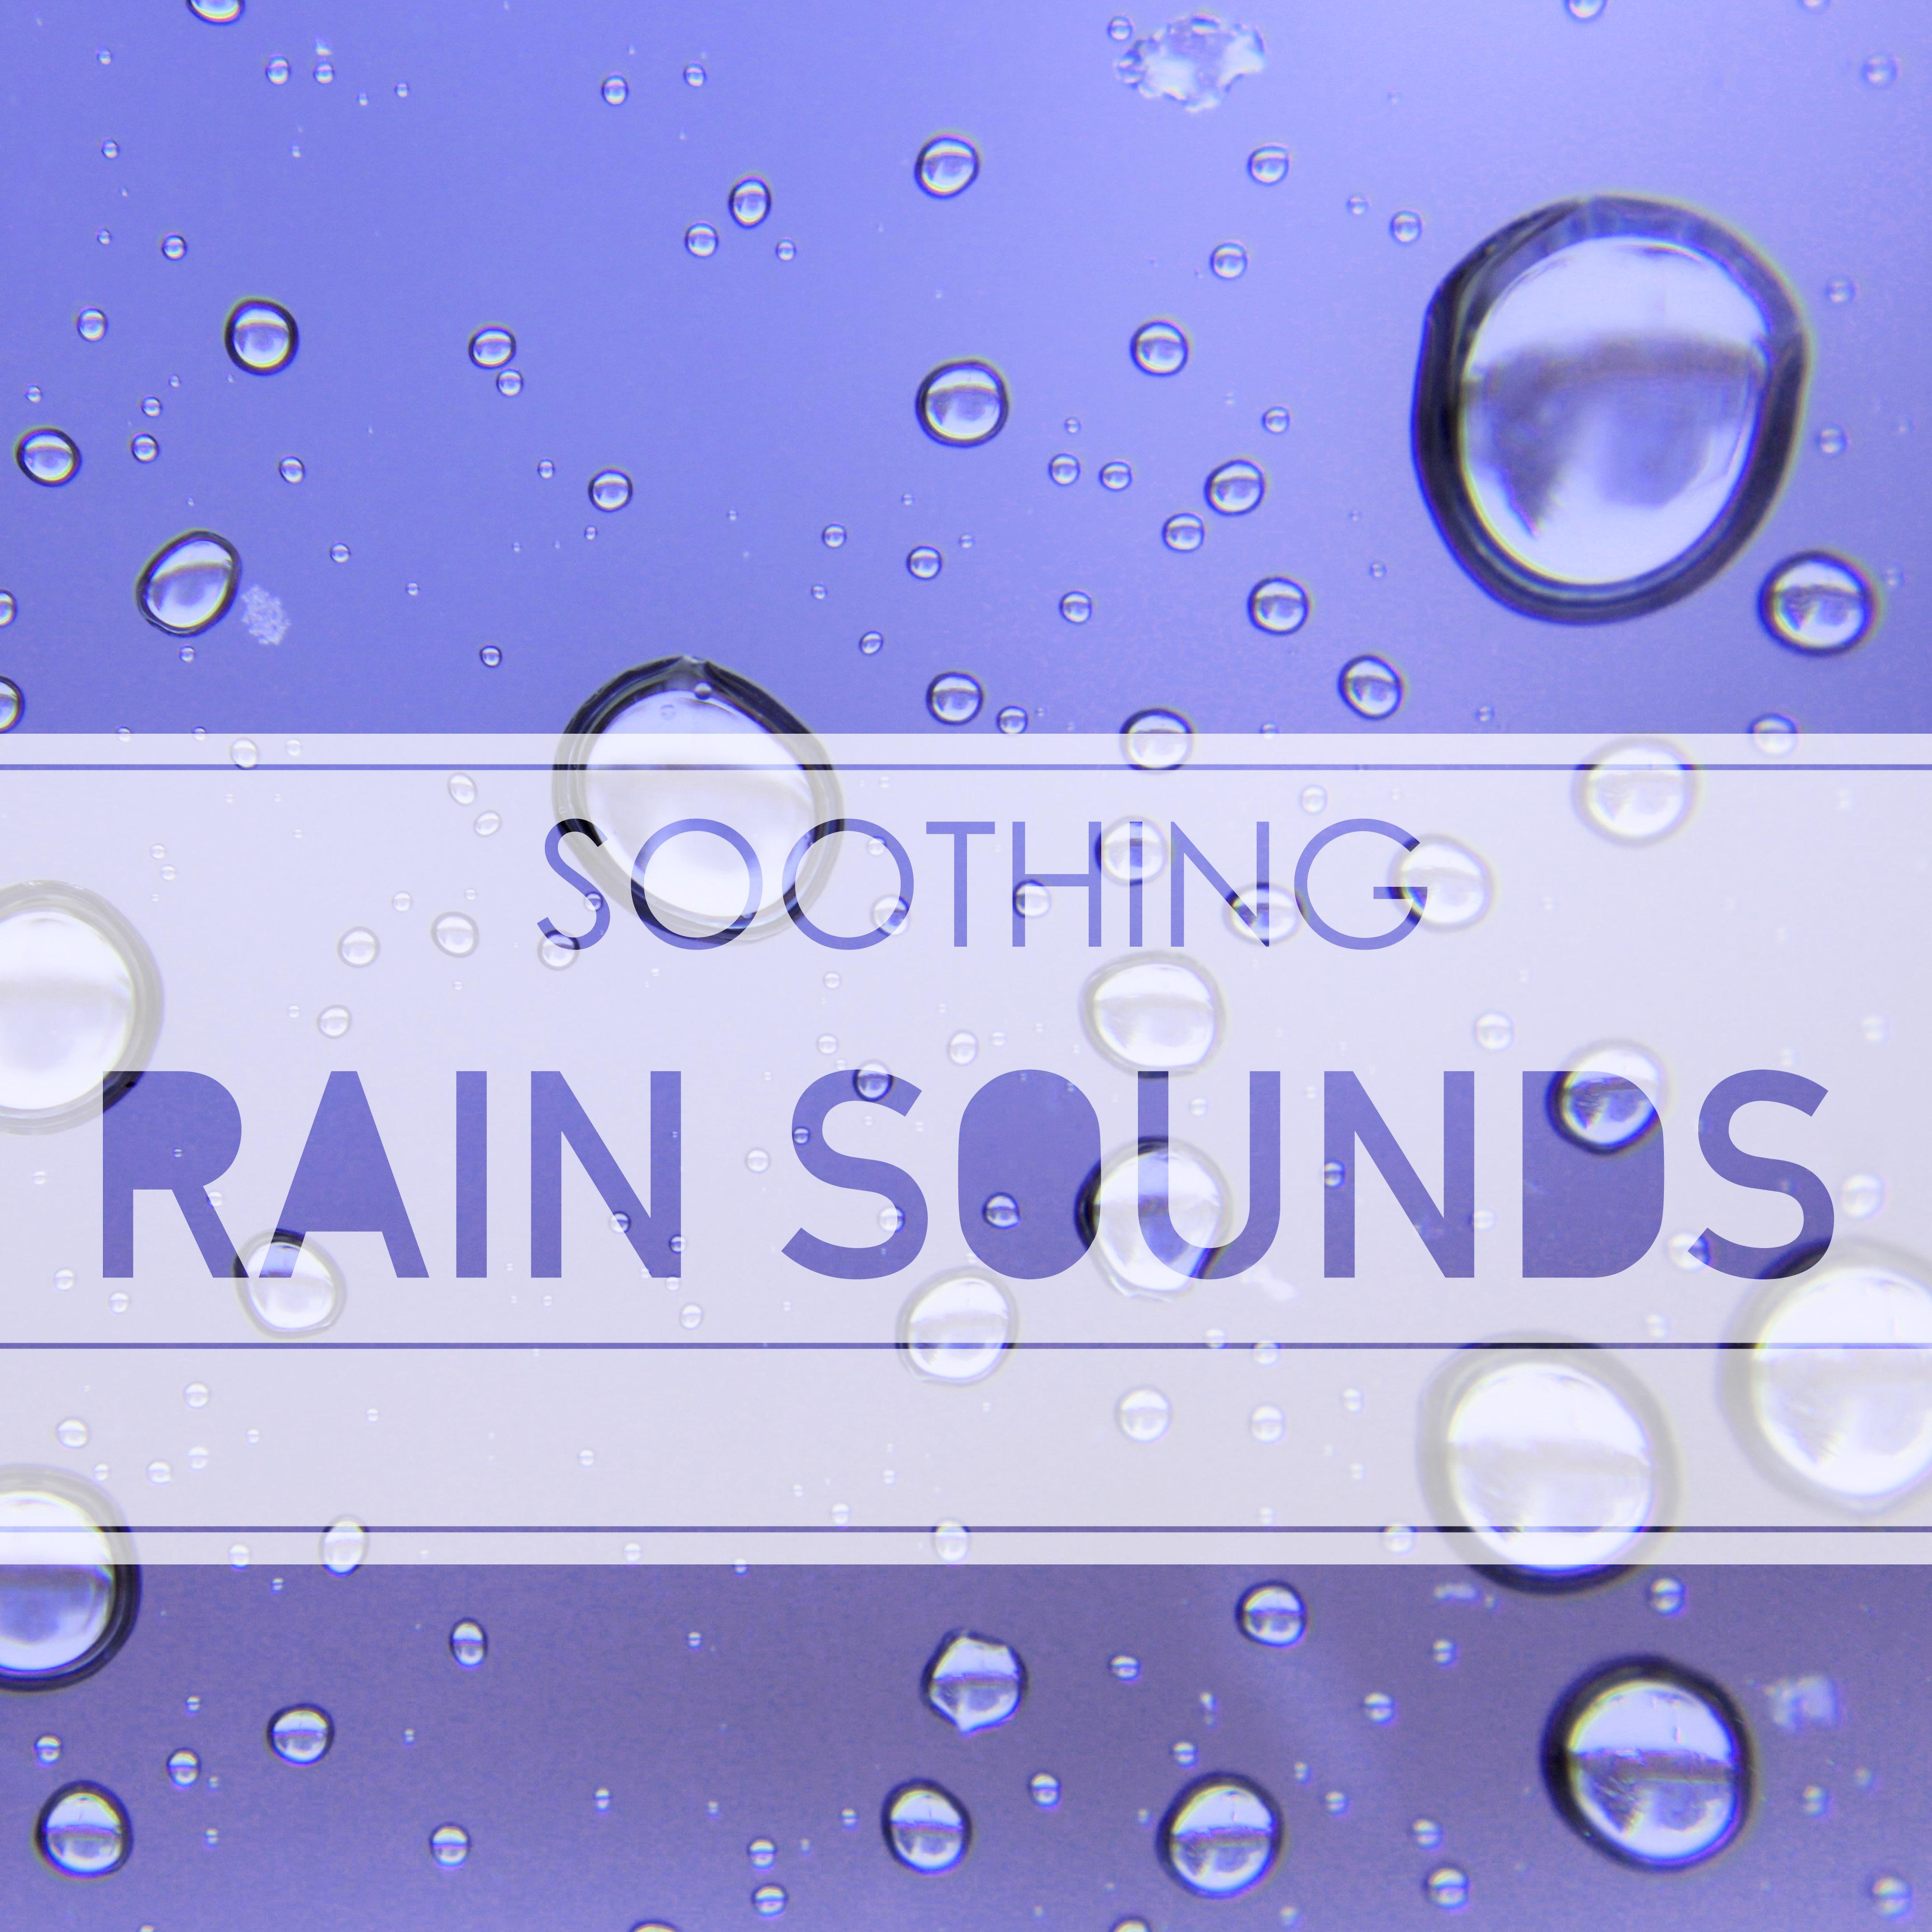 Soothing Rain Sounds - Natural Sound of Nature Music for Sleep Ambience Background, Raining & Thunder Peaceful White Noise